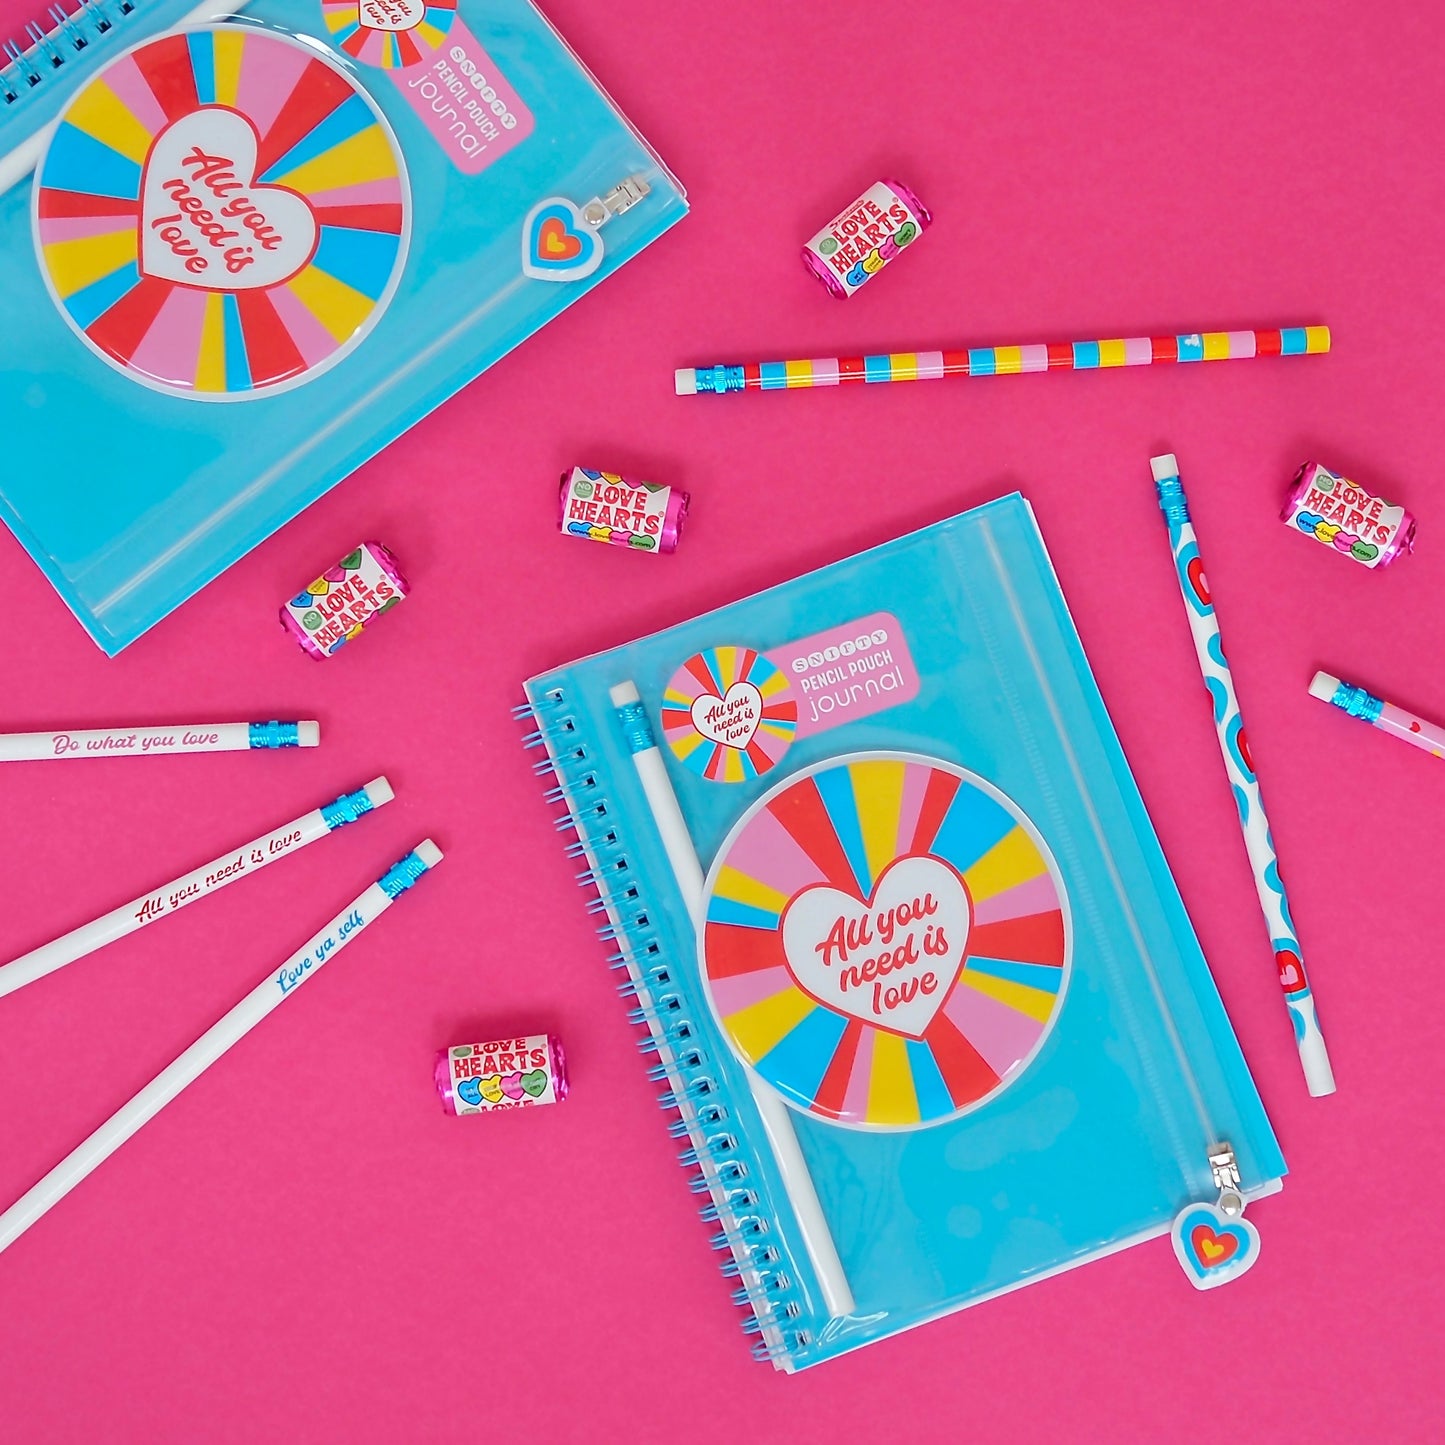 All You Need Is Love - Pencil Set